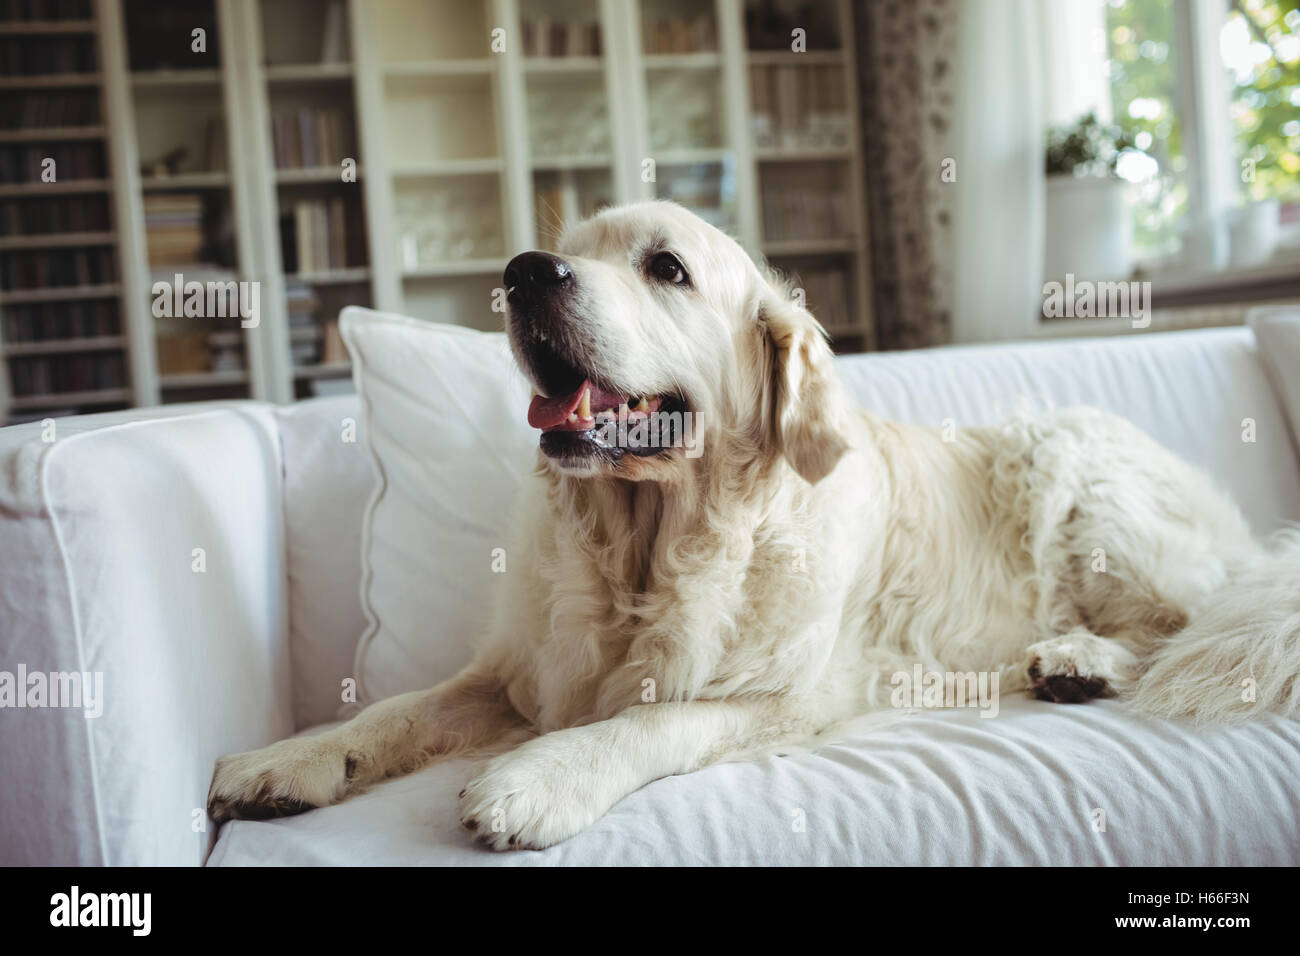 Pet dog relaxing on a sofa Stock Photo